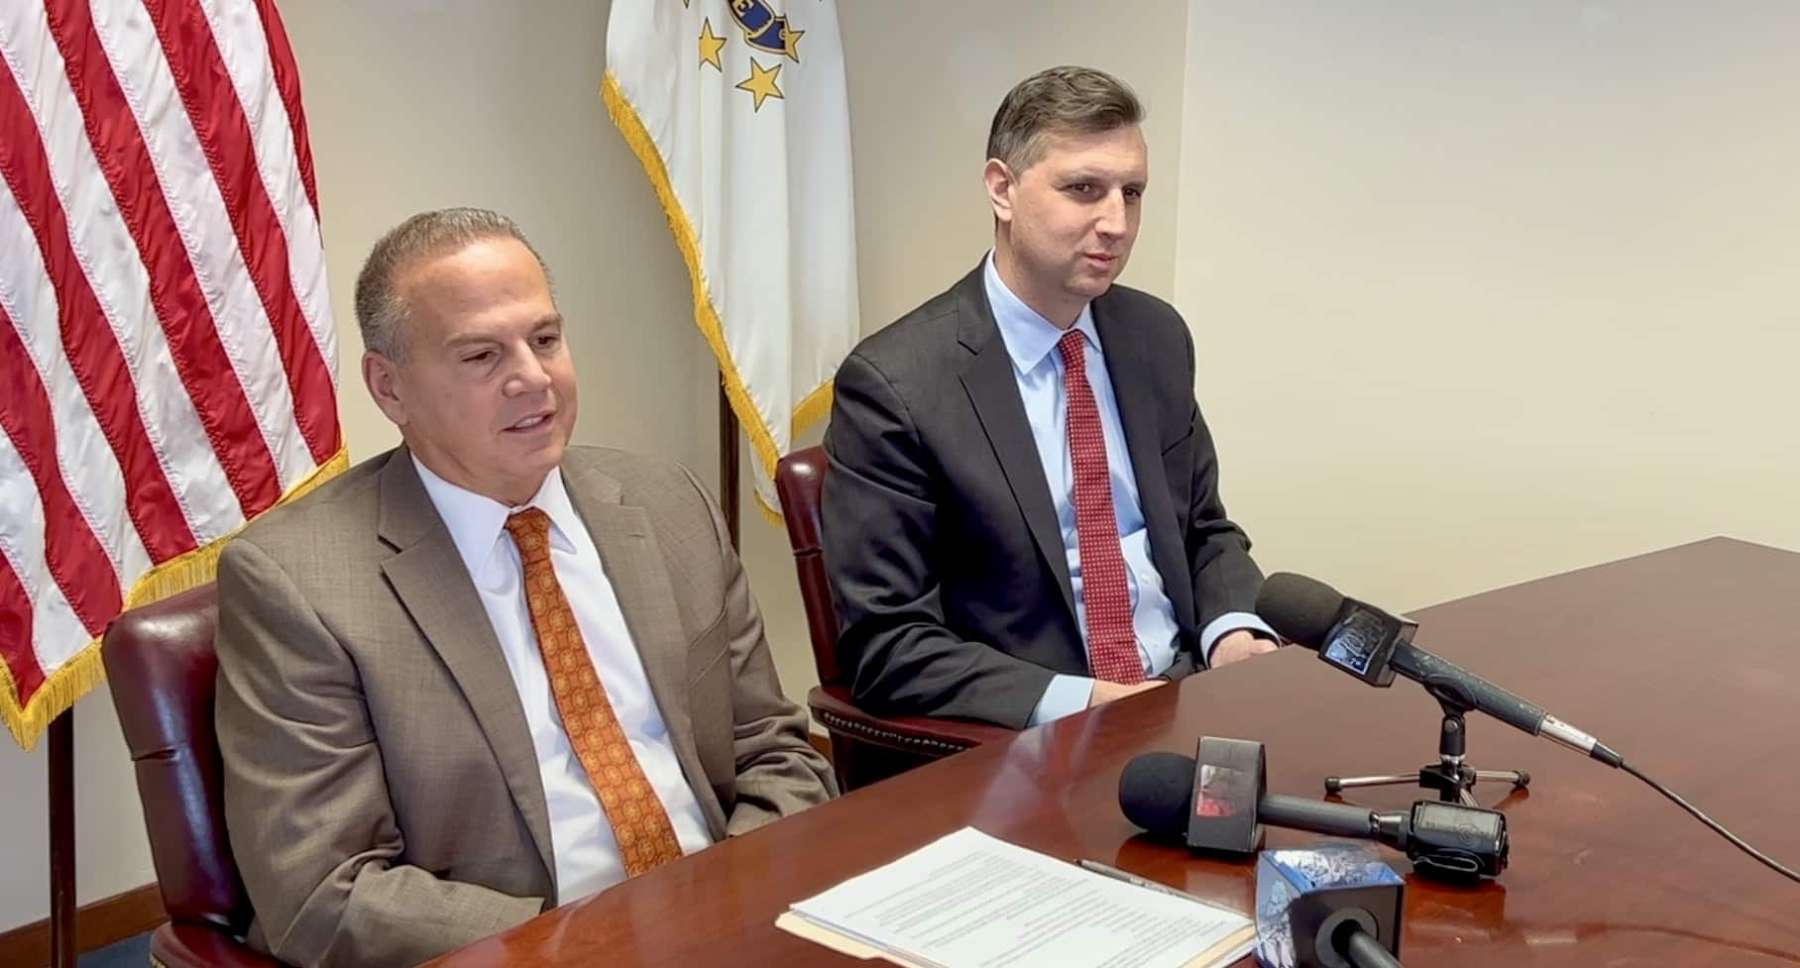 Reps Cicilline and Magaziner discuss first days in Republican-controlled House